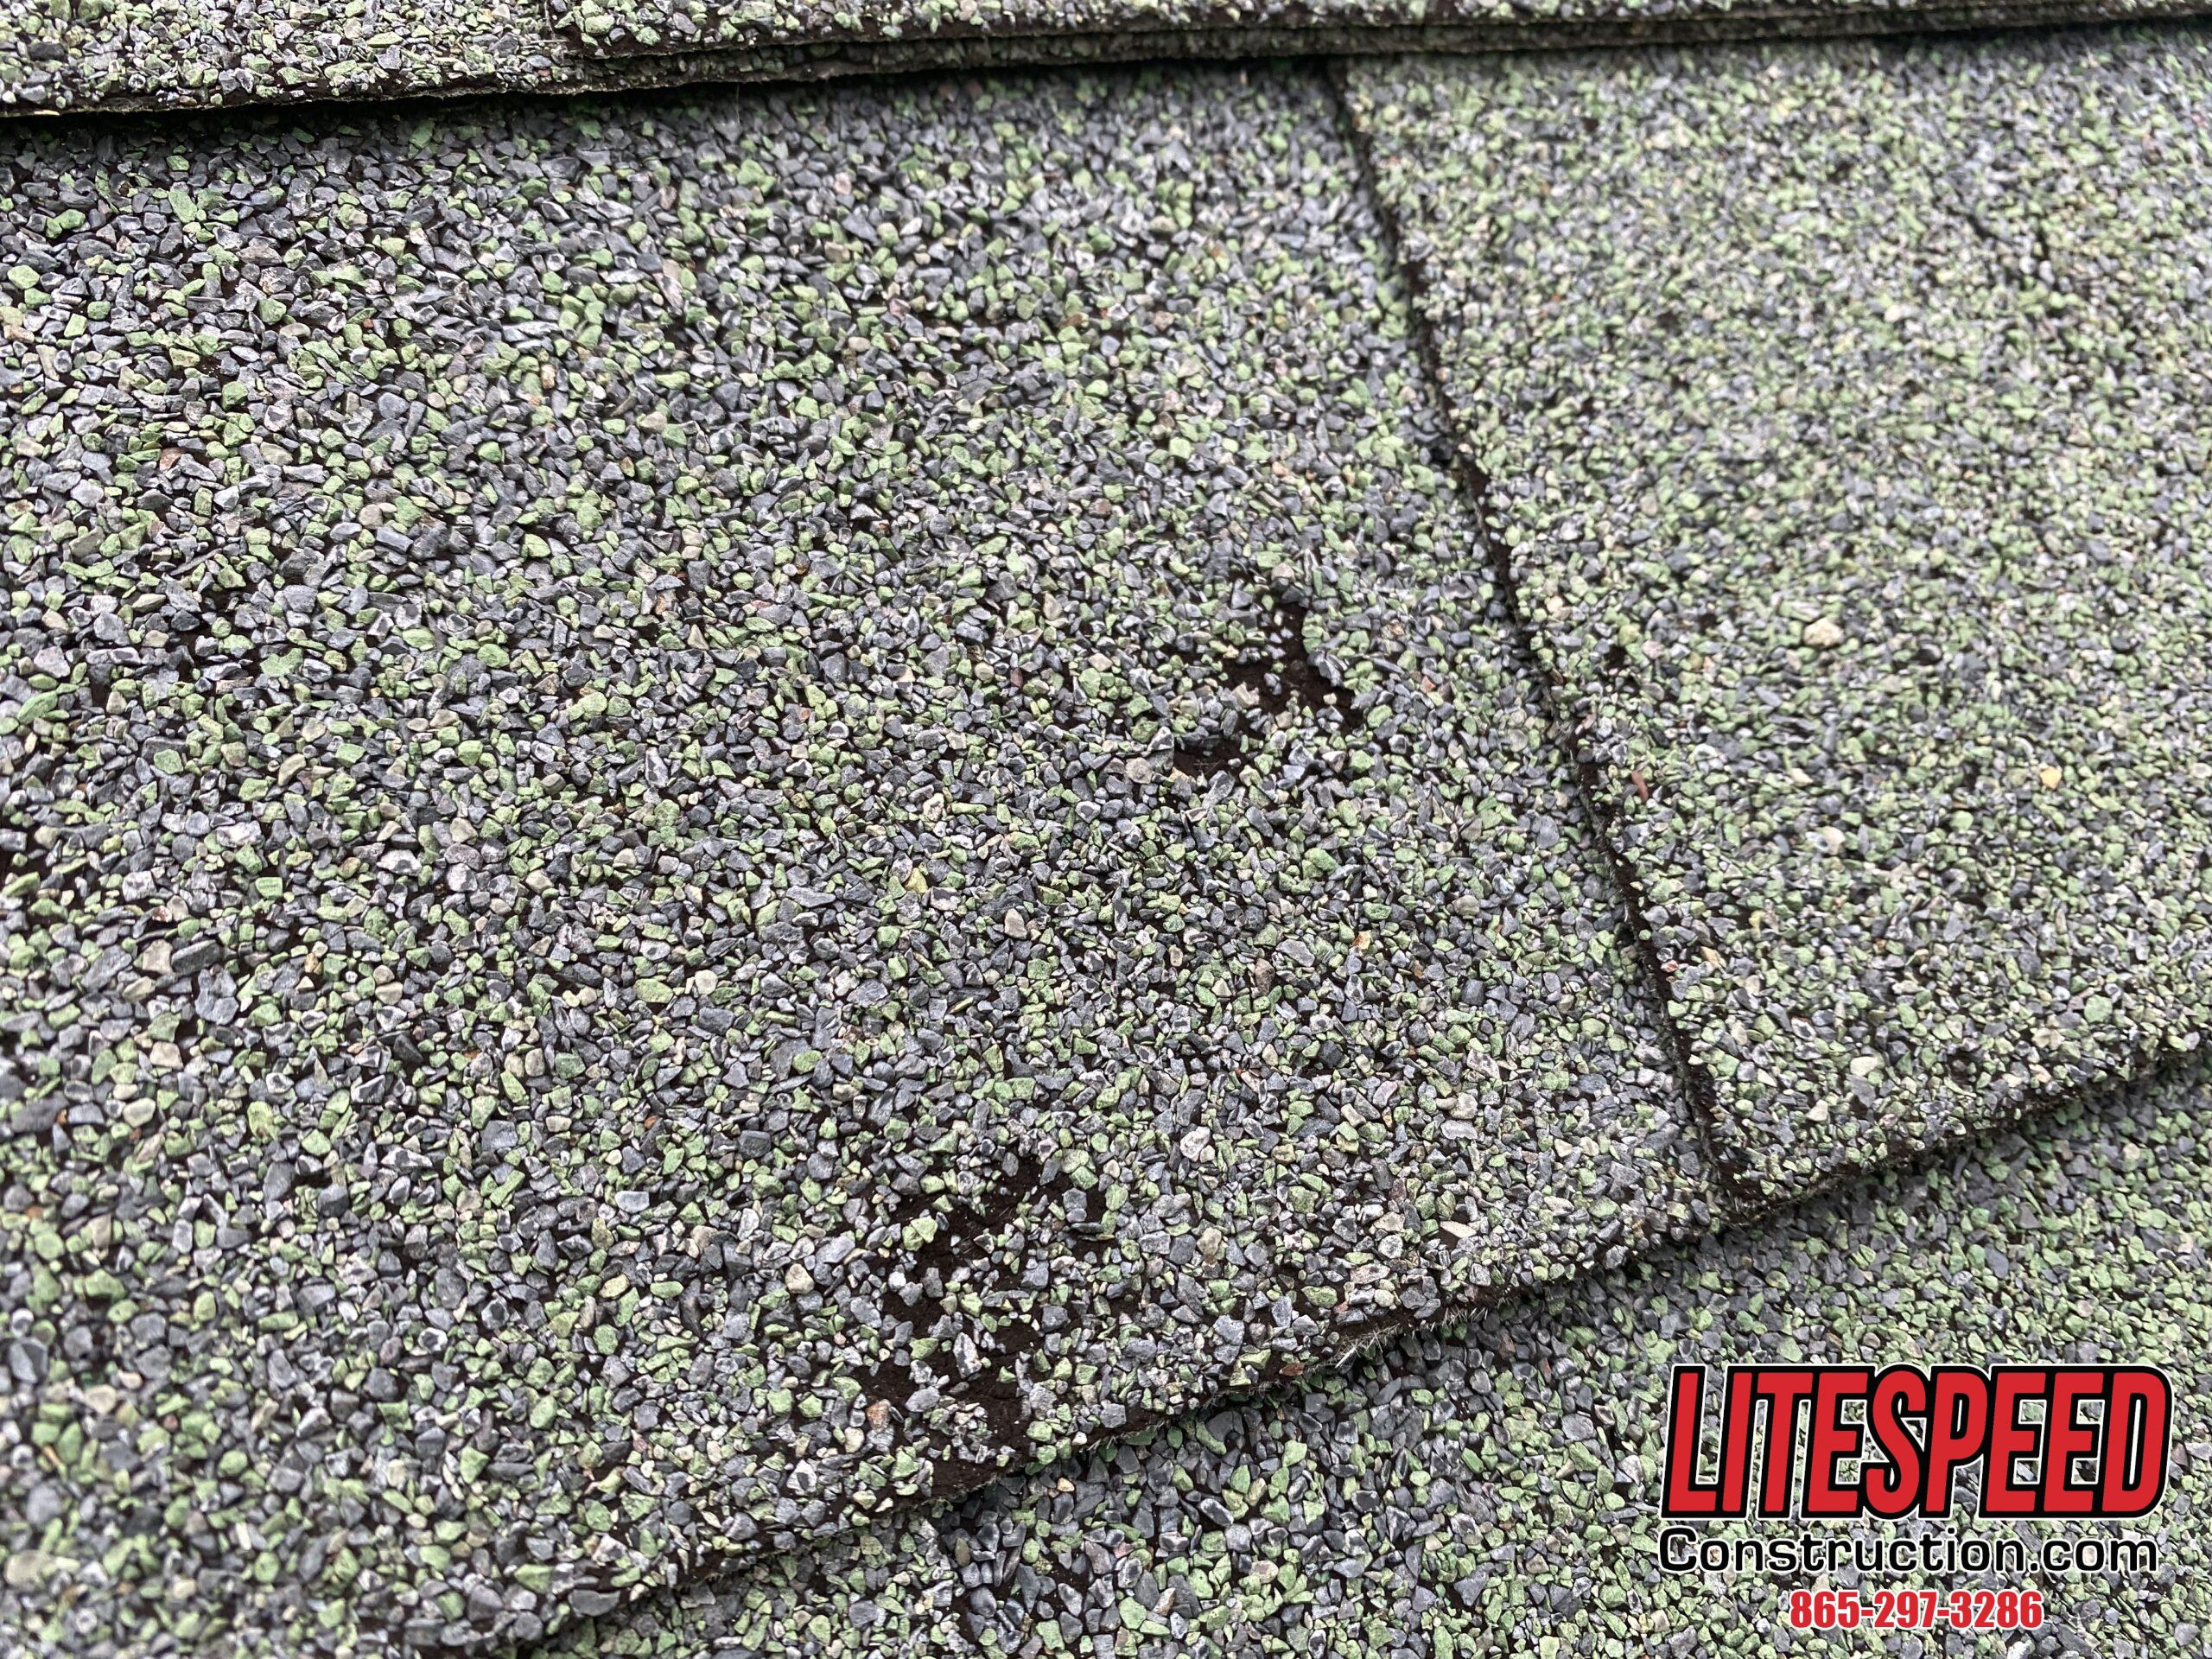 This is a picture of a green shingle with hail damage all over the roof.